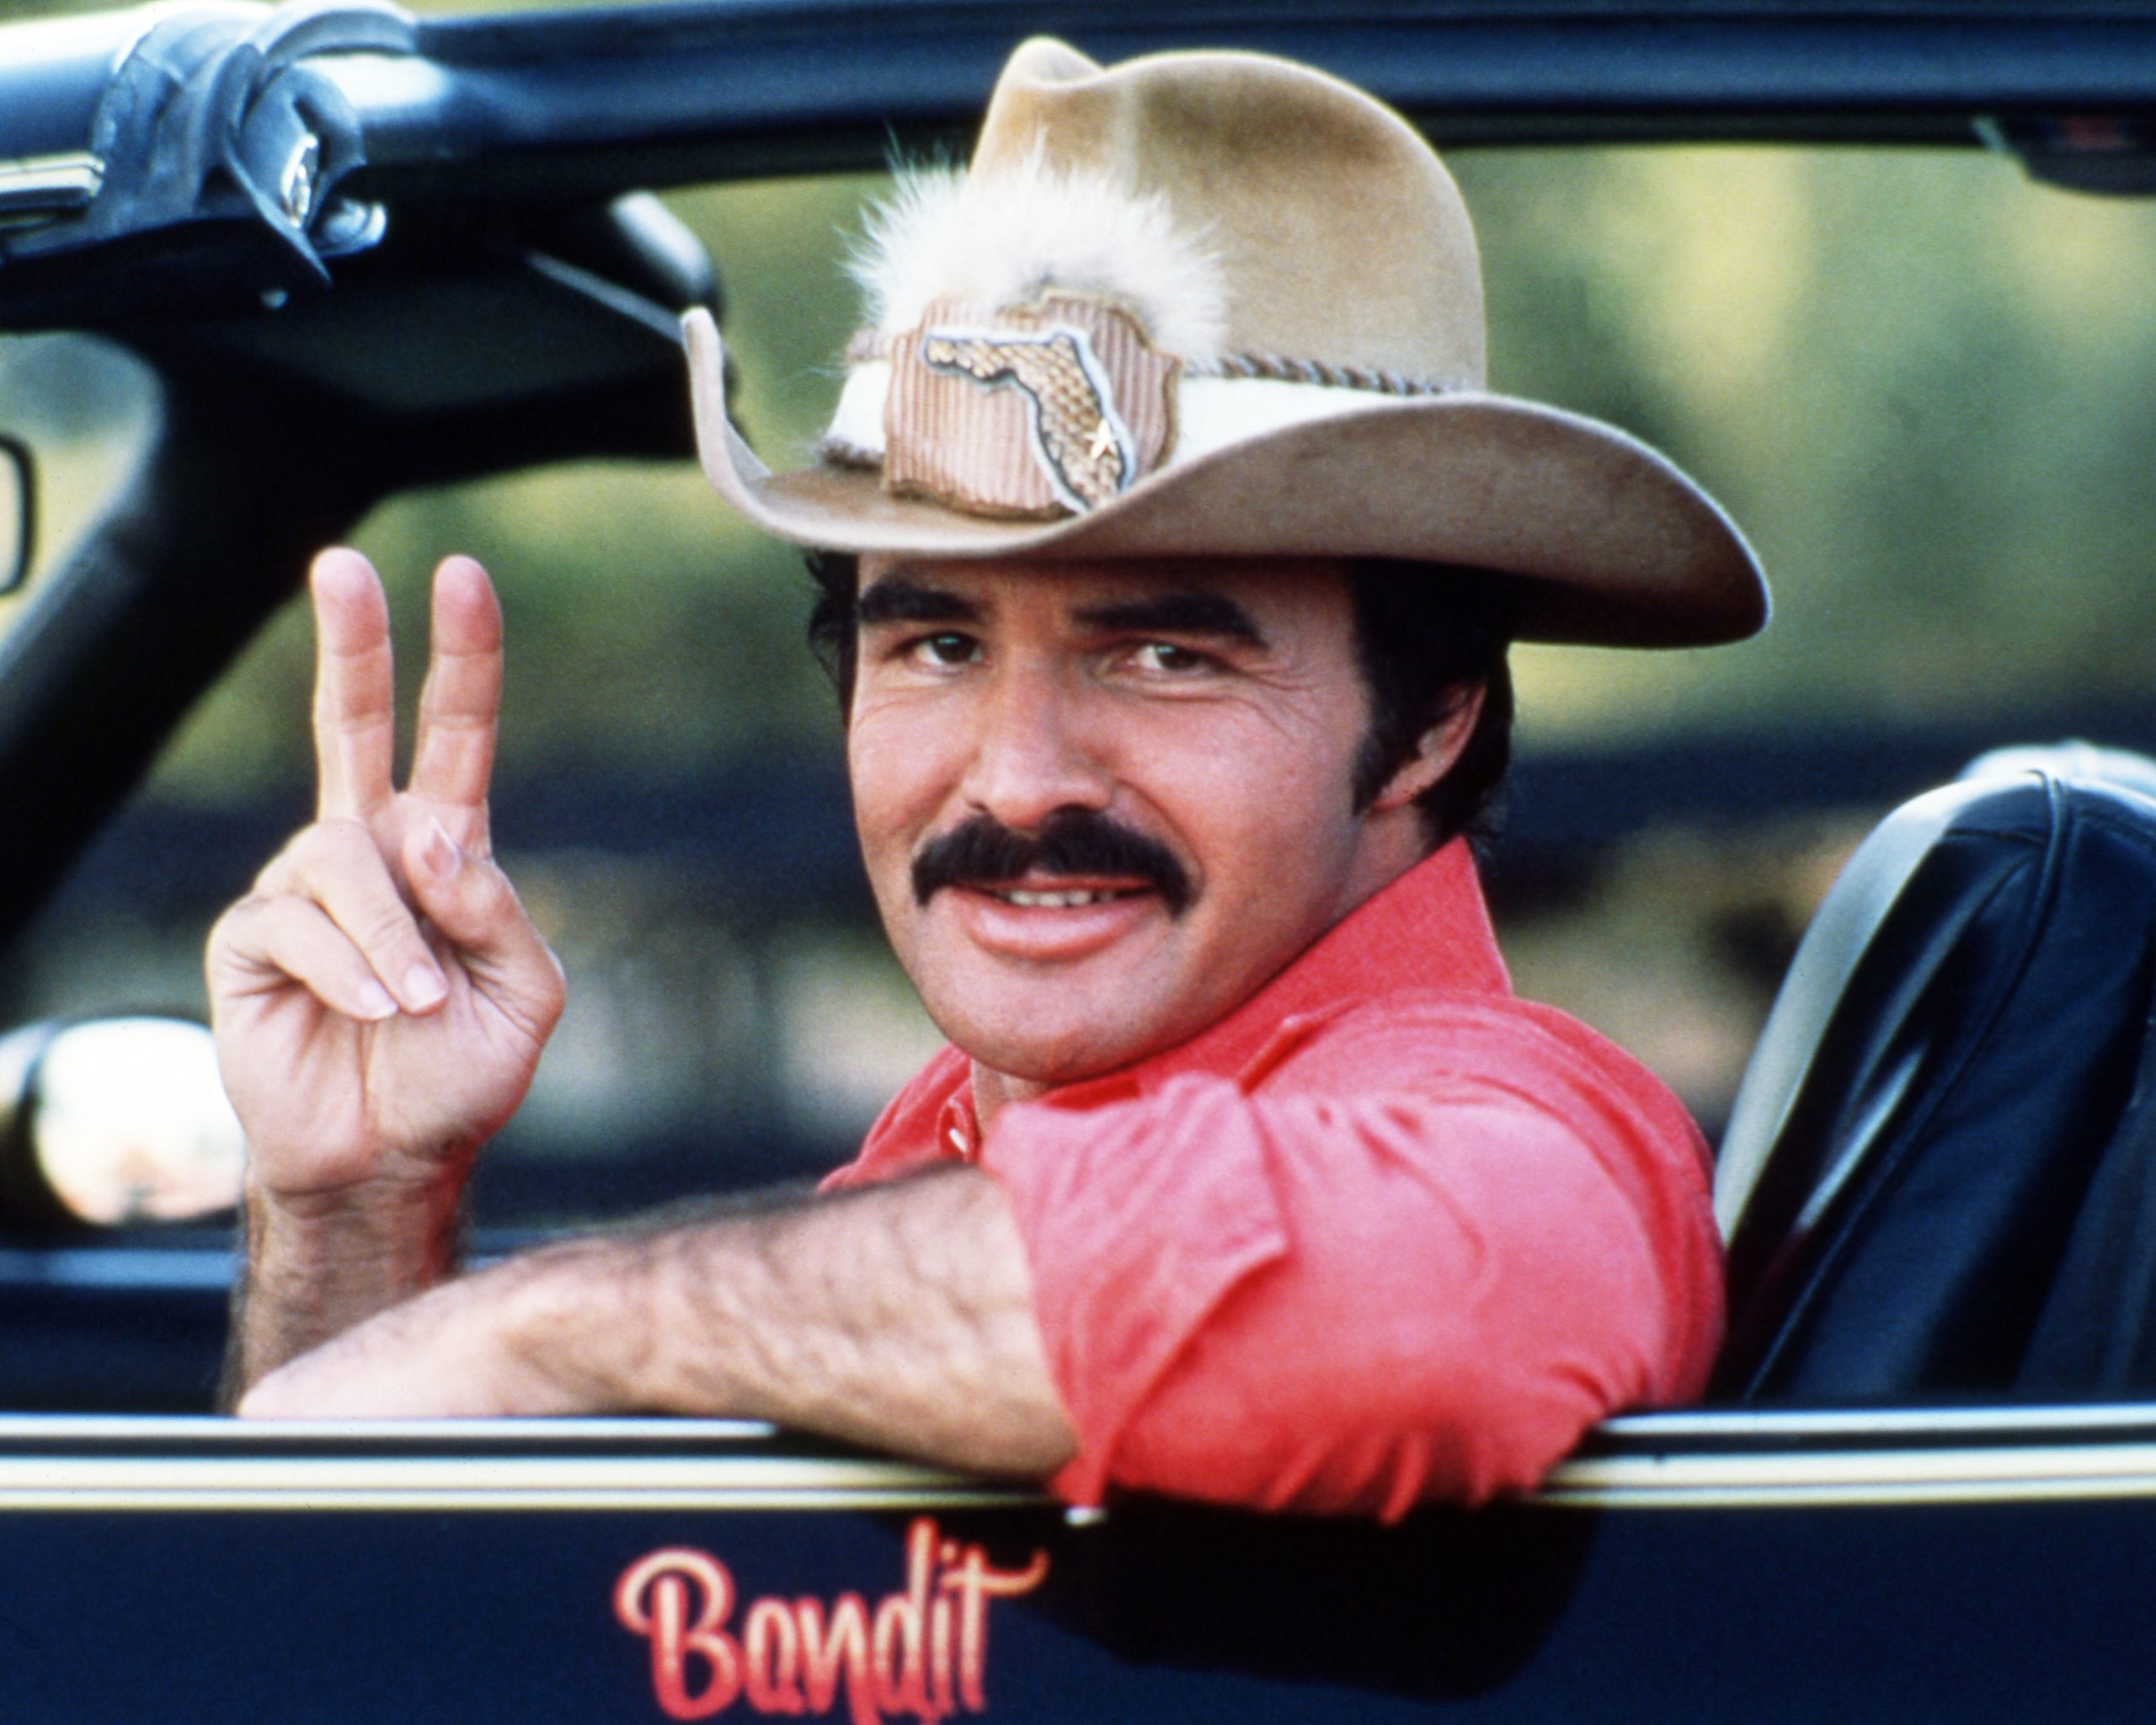 Smokey and the Bandit propelled Pontiac’s Trans Am to stardom and sales